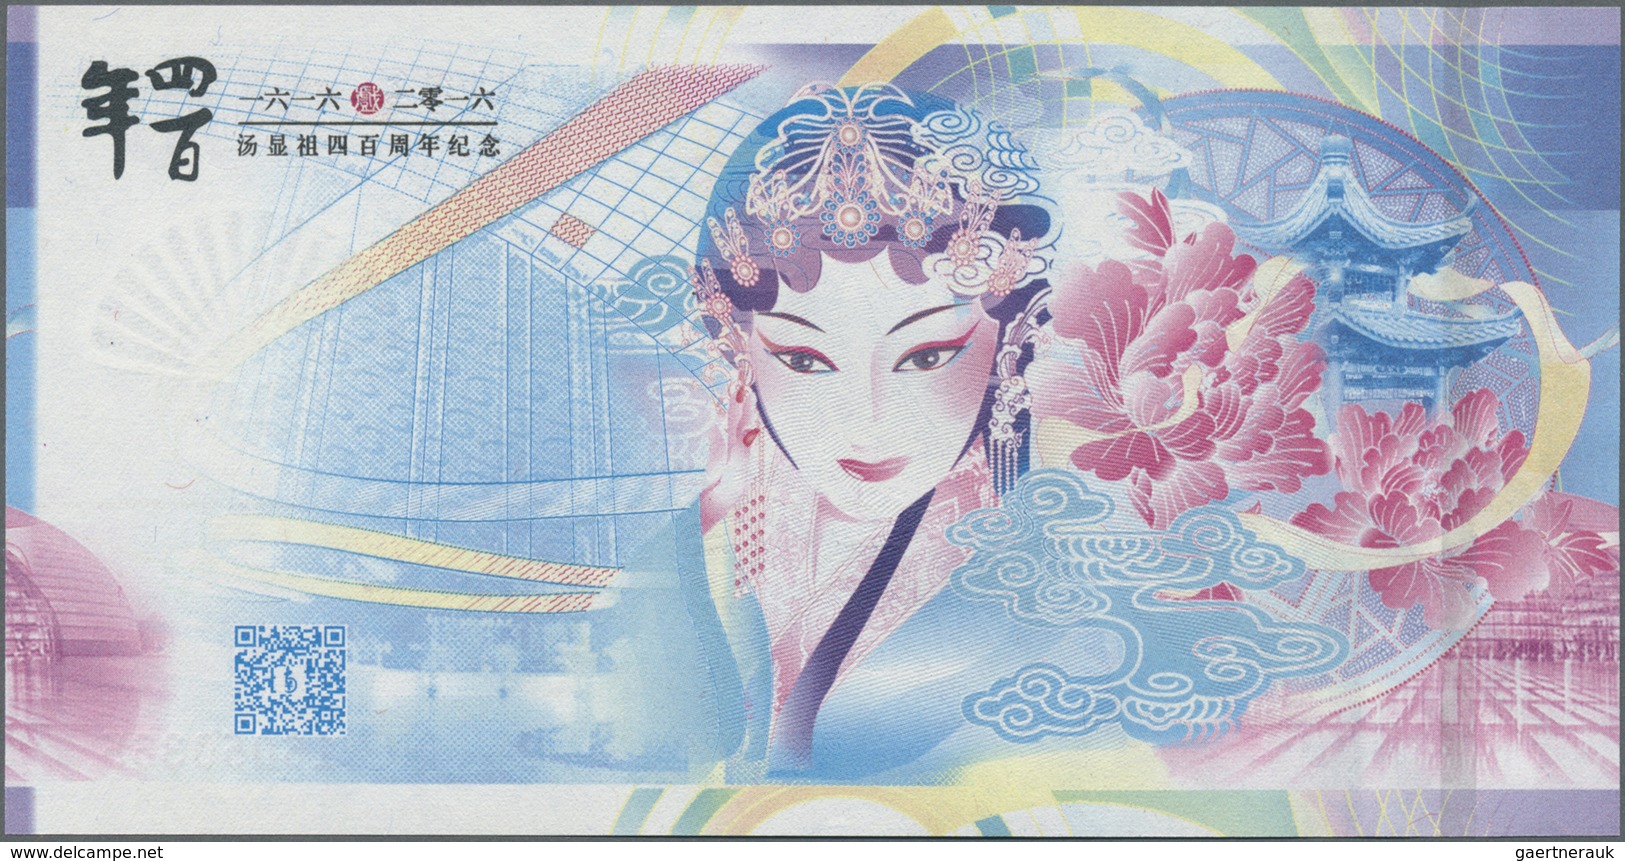 Testbanknoten: China: Chinese Banknote Printing & Minting Company, 400 Units Intaglio Specimen With - Specimen